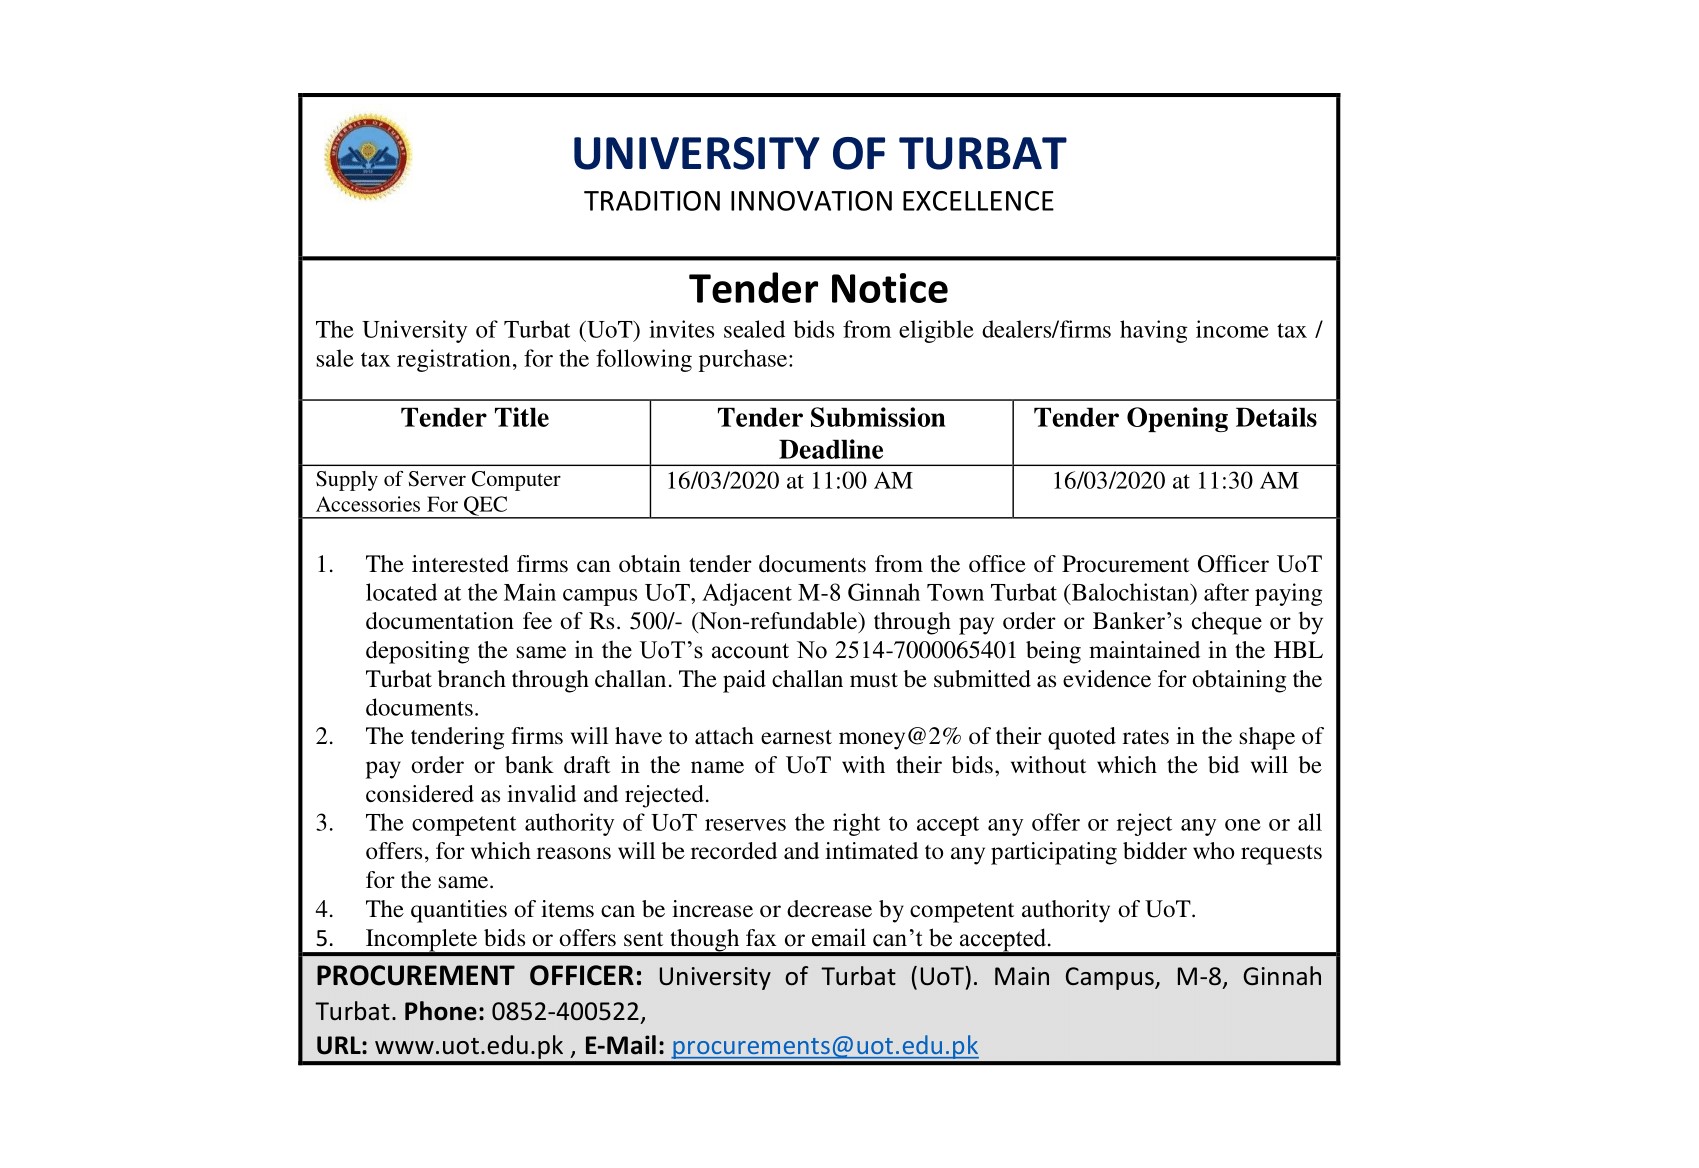 Tender Notice (Supply of Server Computer Accessories For QEC)